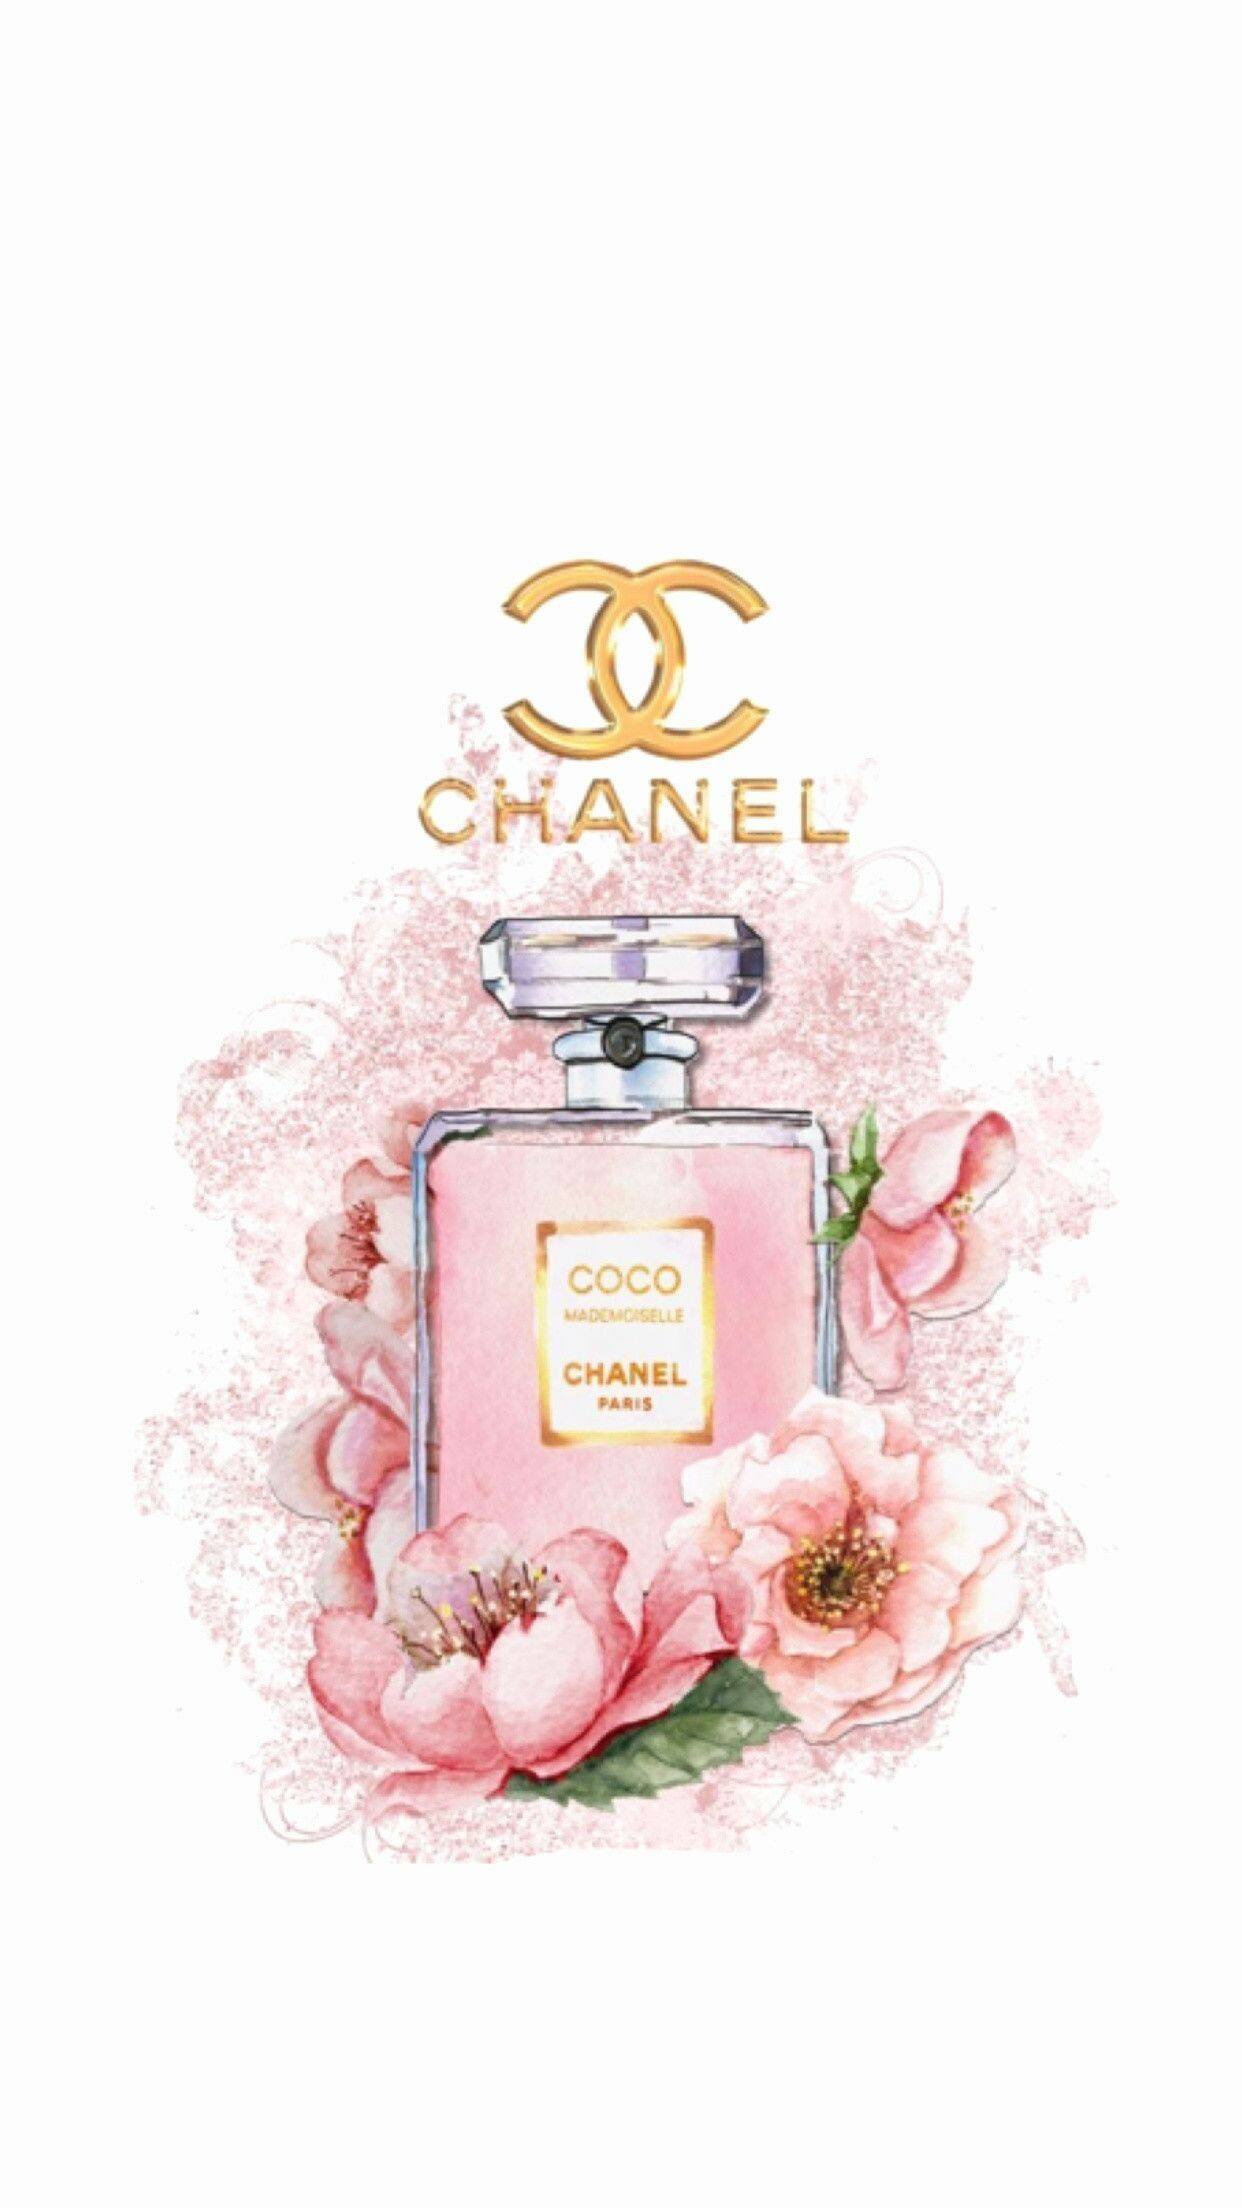 HD wallpaper, Iphone Hd Chanel Background, Refined Backgrounds, 1250X2210 Hd Phone, Classic Fashion, Pink Coco Chanel, Elegant Wallpapers